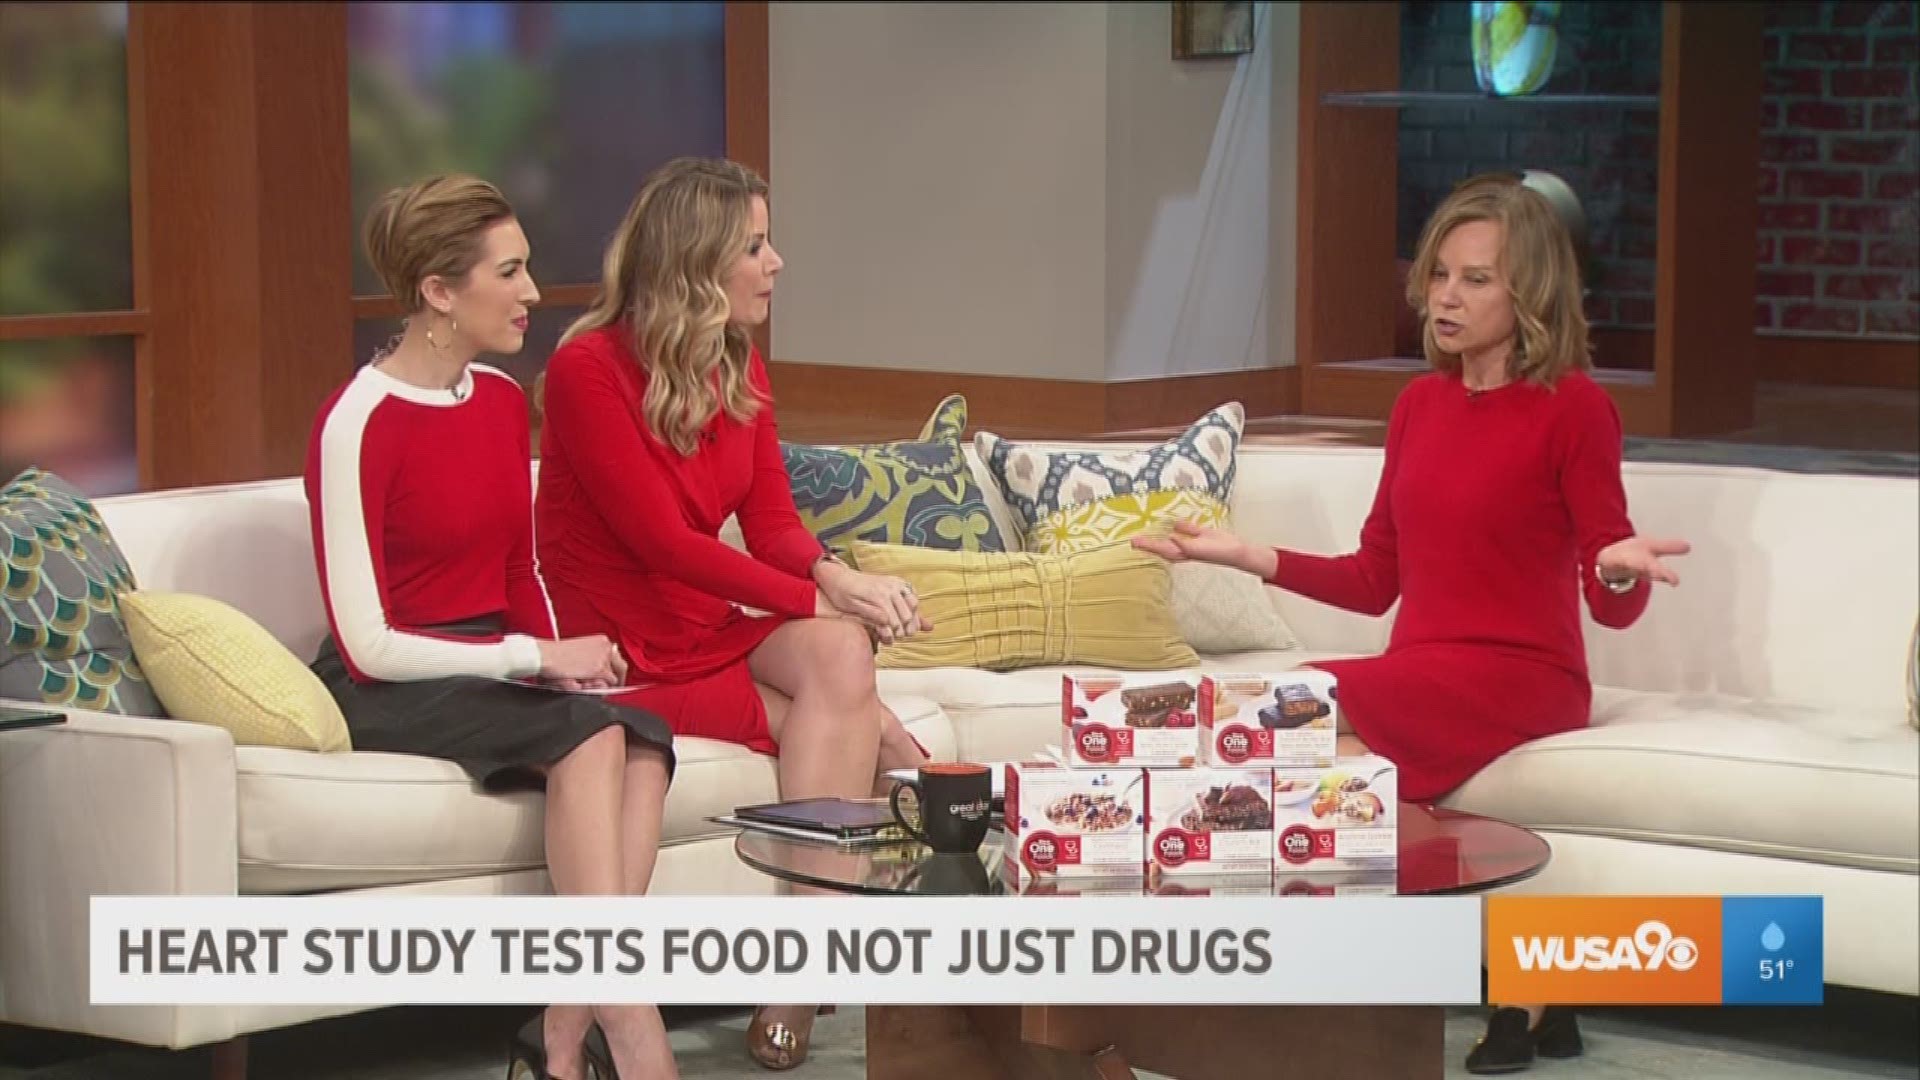 Cardiologist Elizabeth Klodas, MD, FACS, talks about a new study presented that shows most people can lower their LDL levels with 2 food swaps per day.